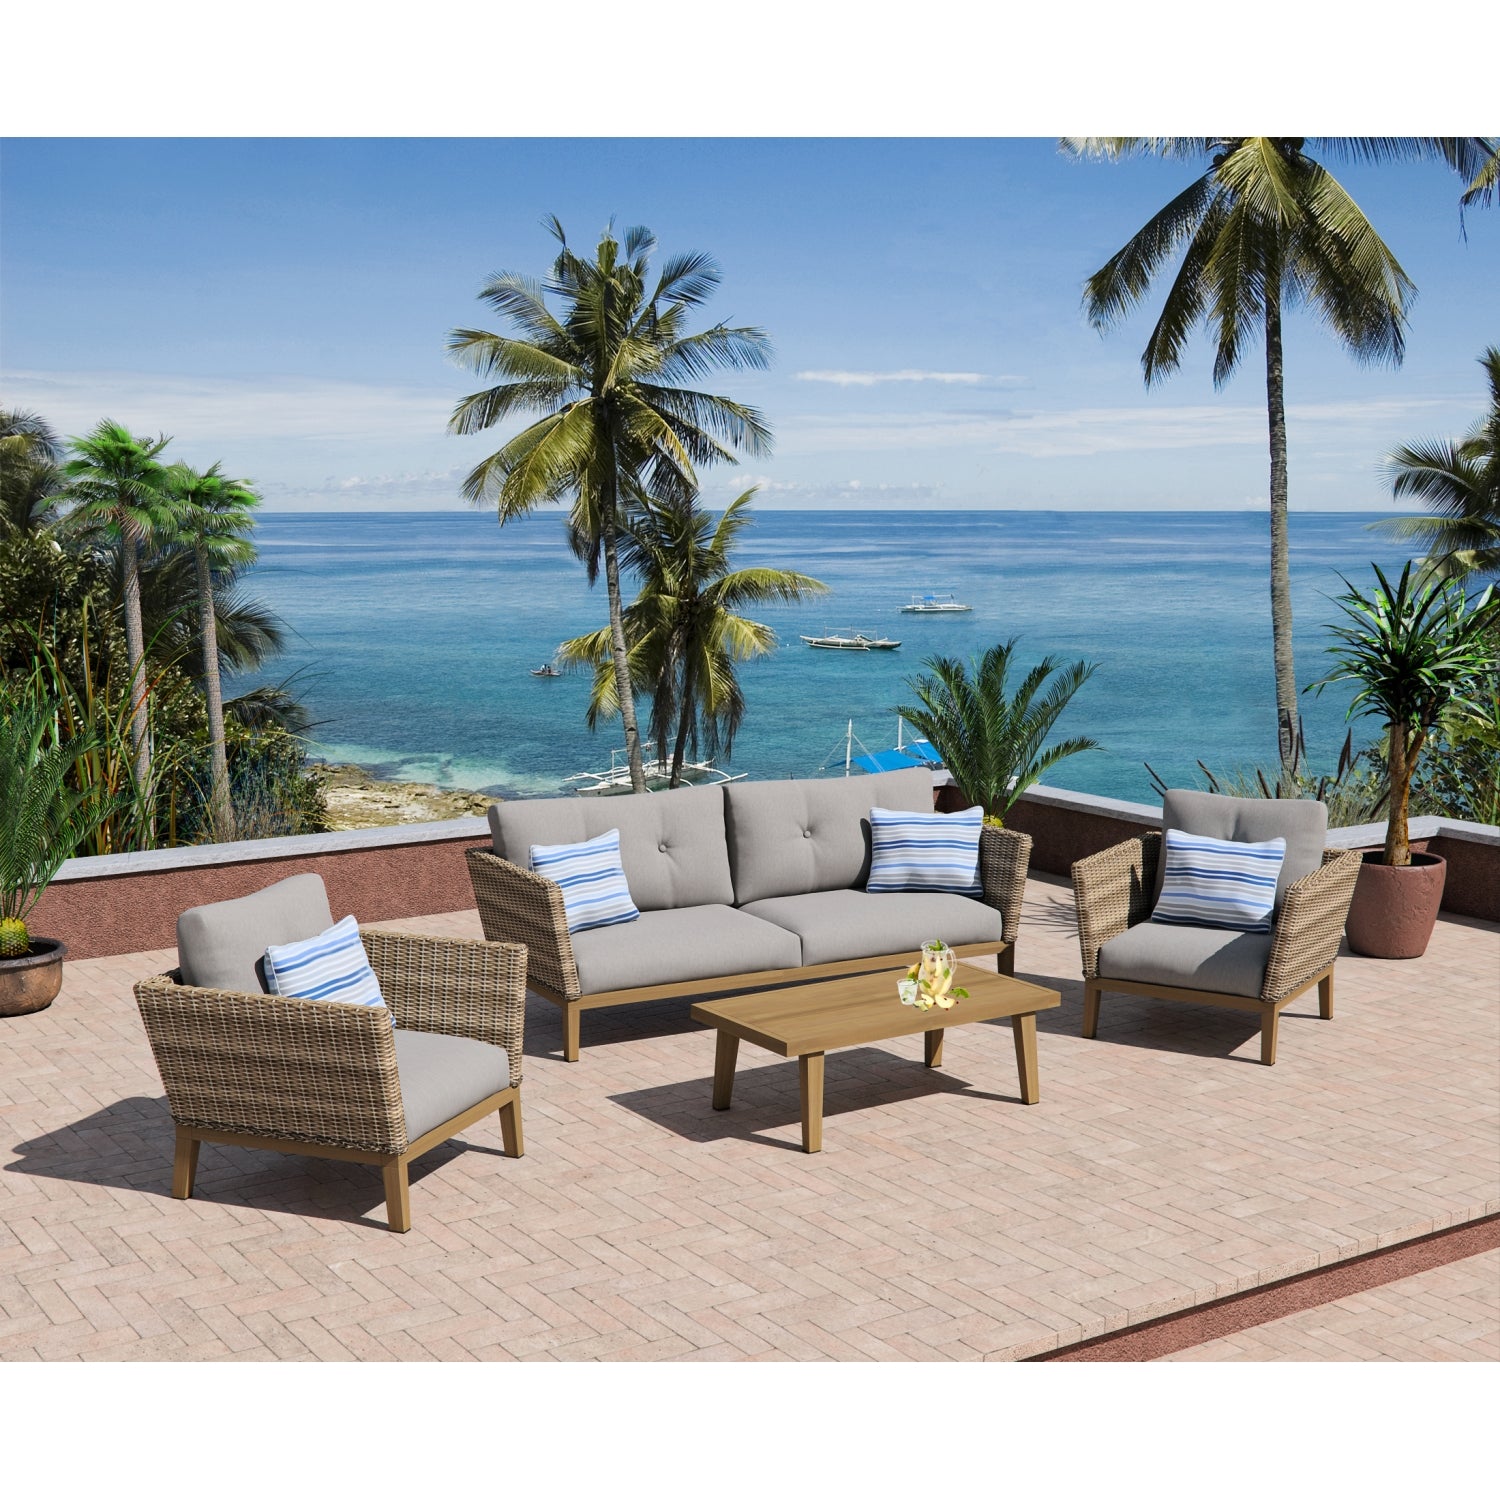 Torcello Collection 4-Piece Aluminum Rattan Seating Set with Sunbrella Cushions